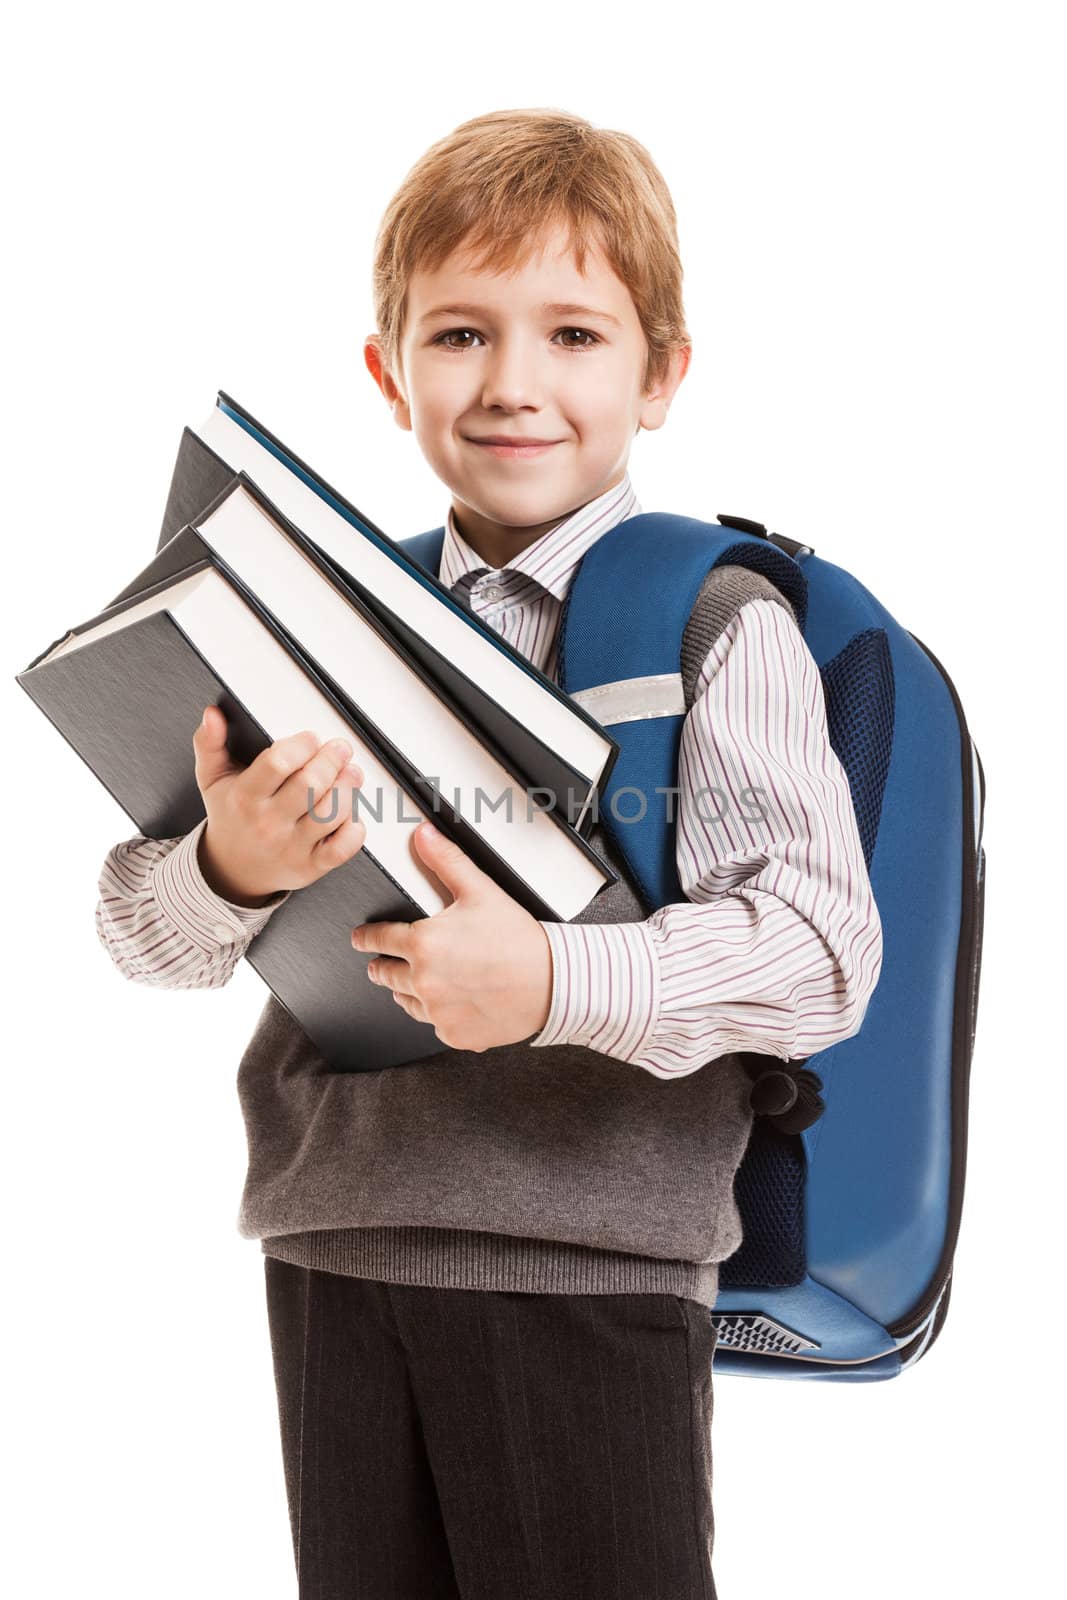 Little smiling child boy with school backpack holding education books in hands